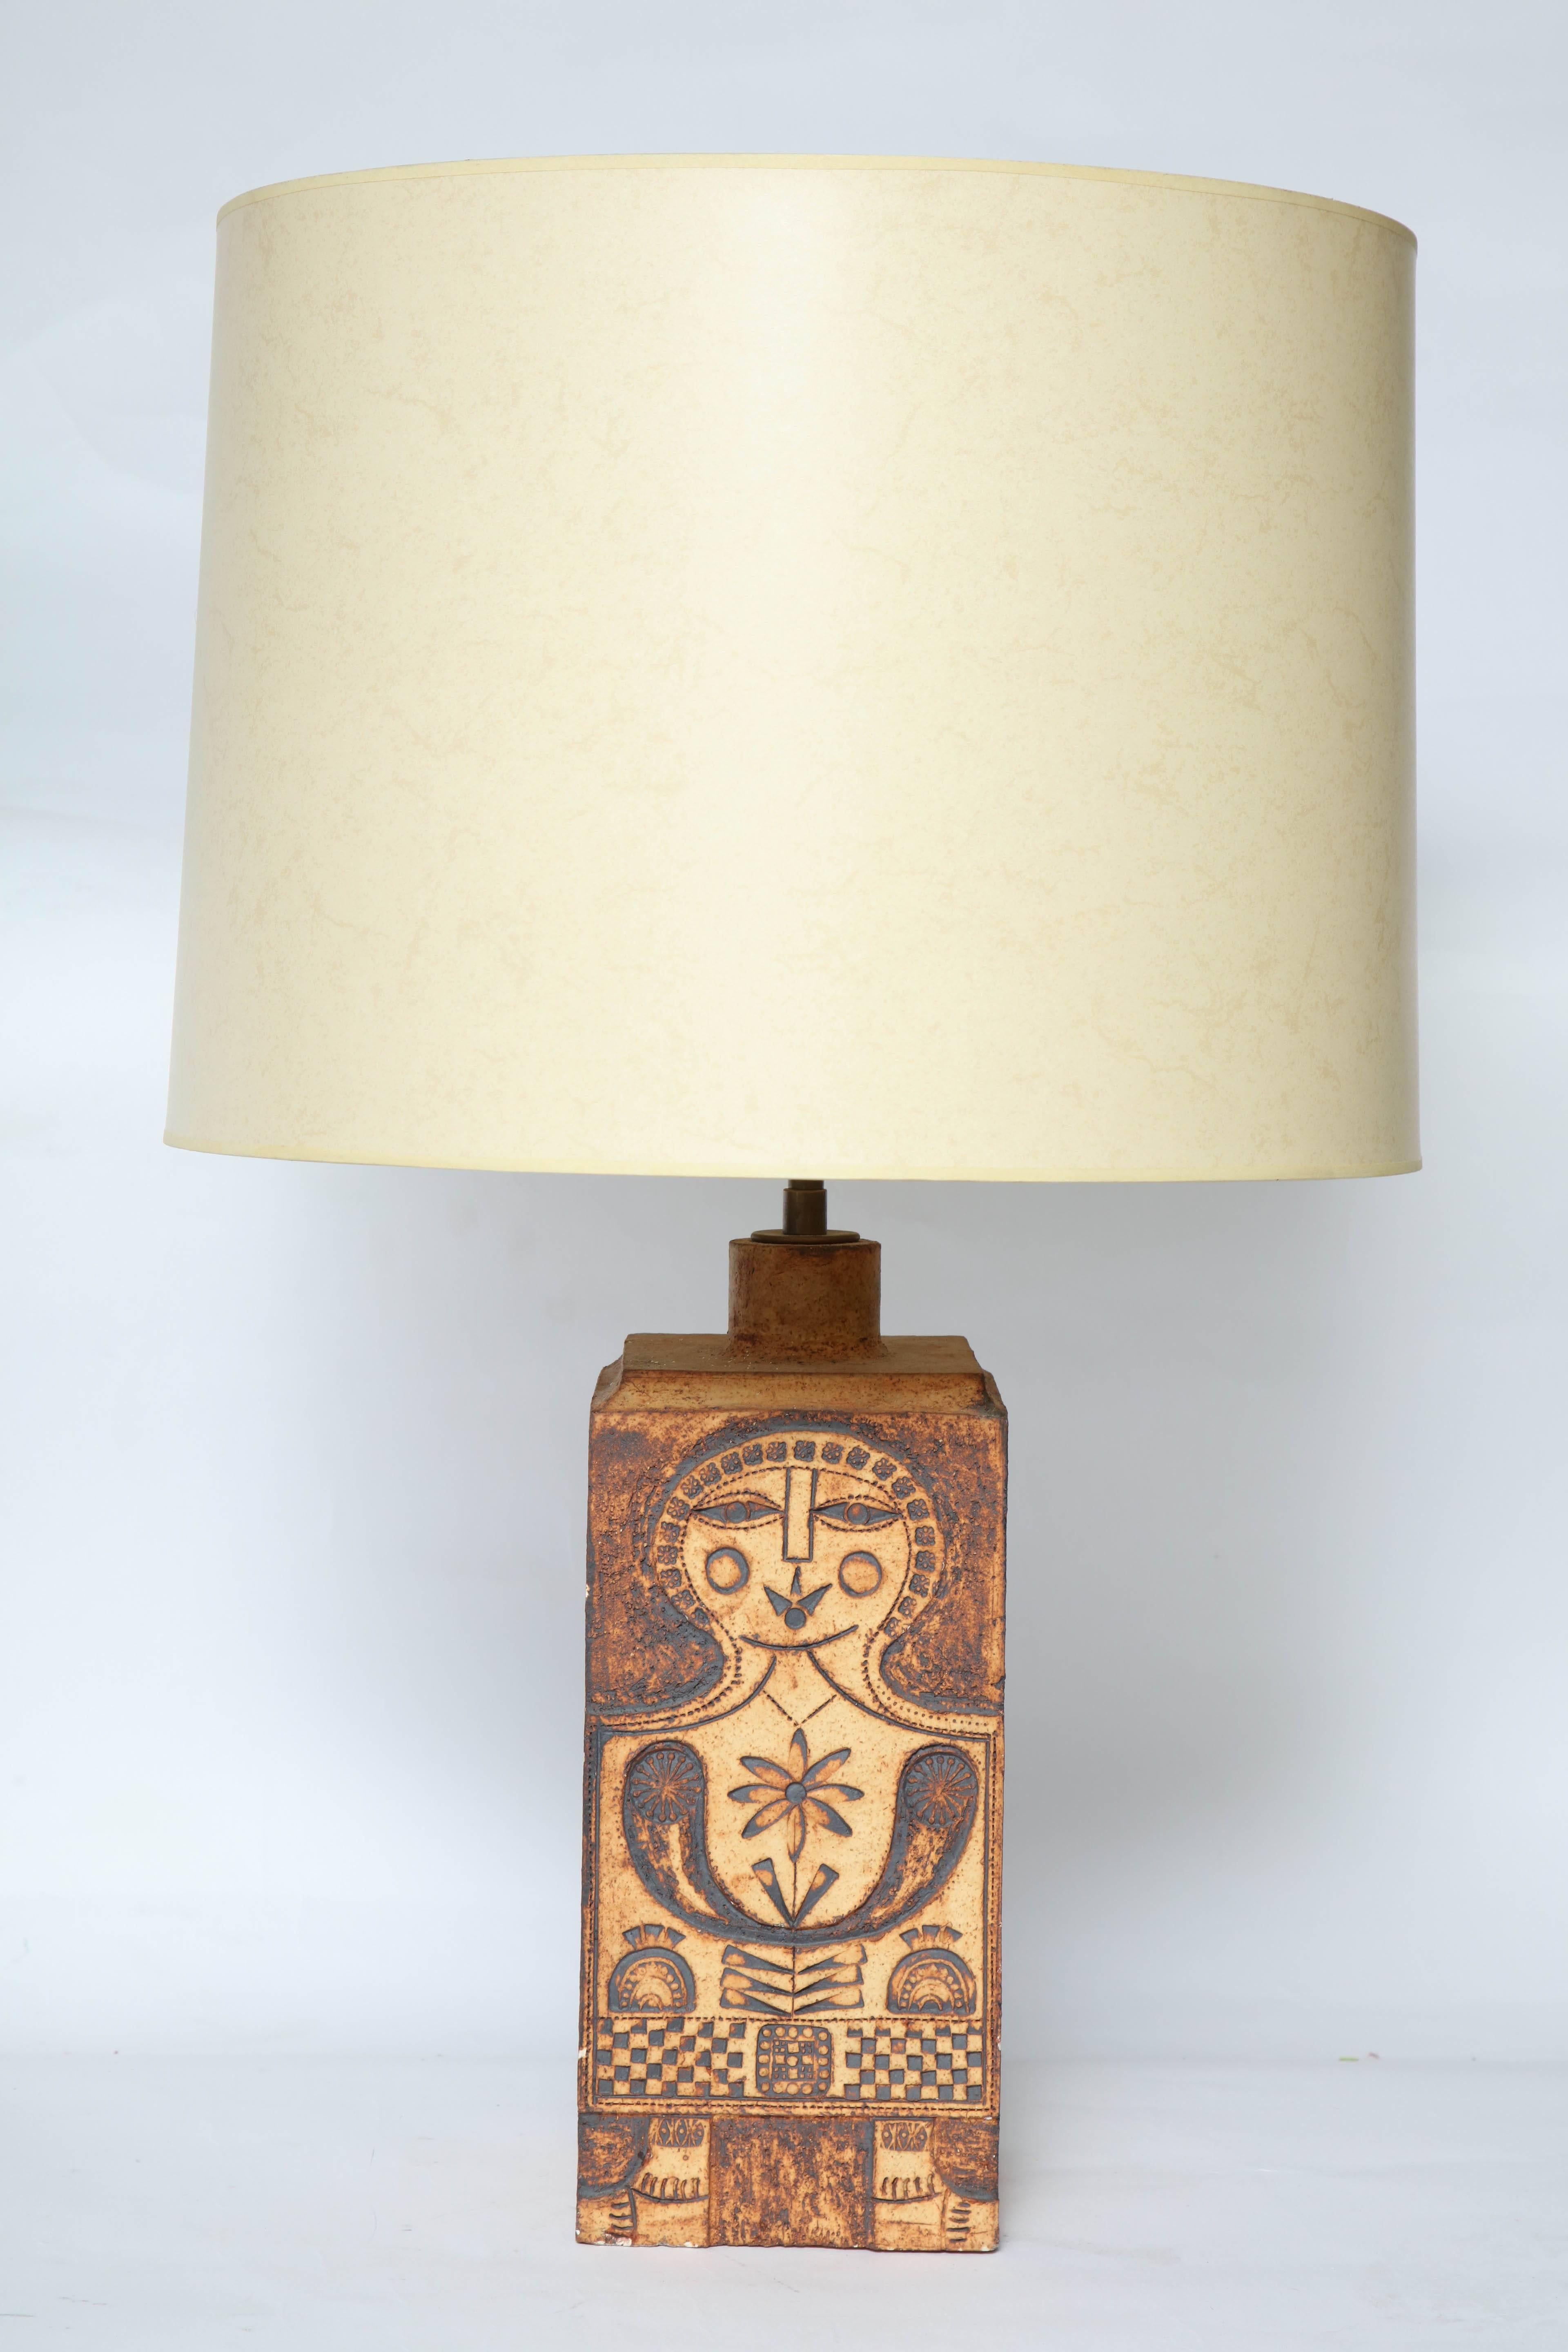 Mid-Century Modern ceramic table lamp signed Capron Valauris, Paris France, circa 1950s
Shade not included.